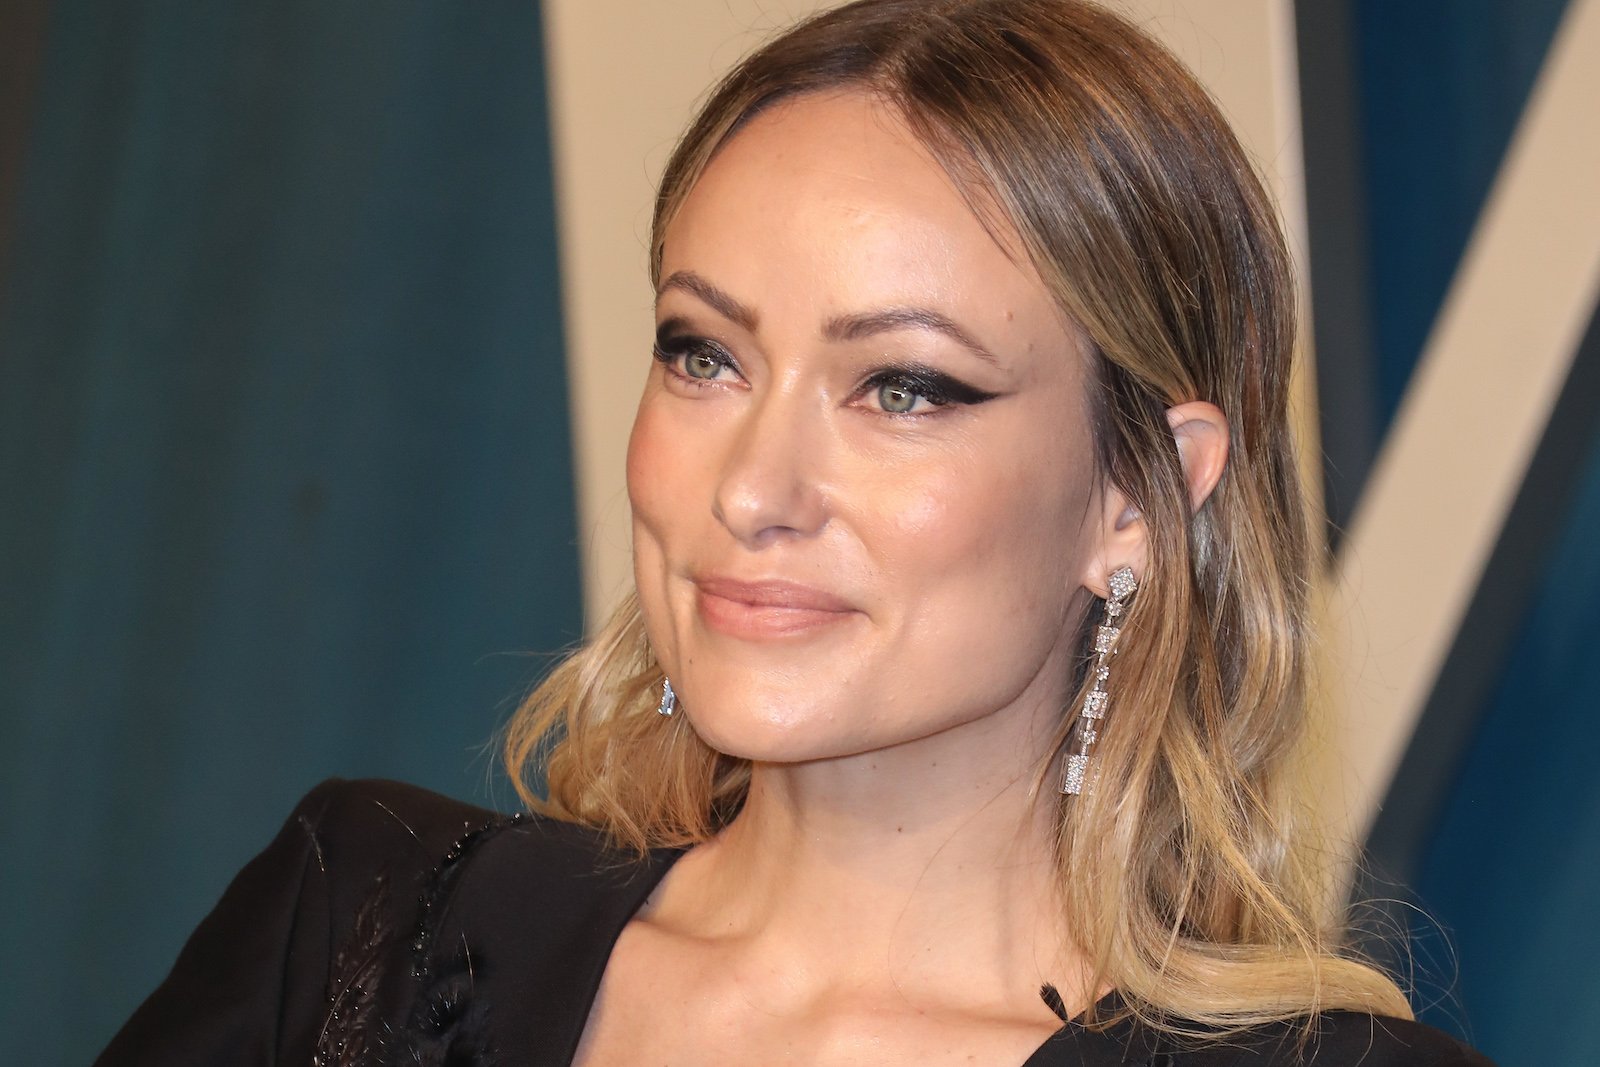 Olivia Wilde's Vogue recent interview is a far cry from where she started in her career in Hollywood